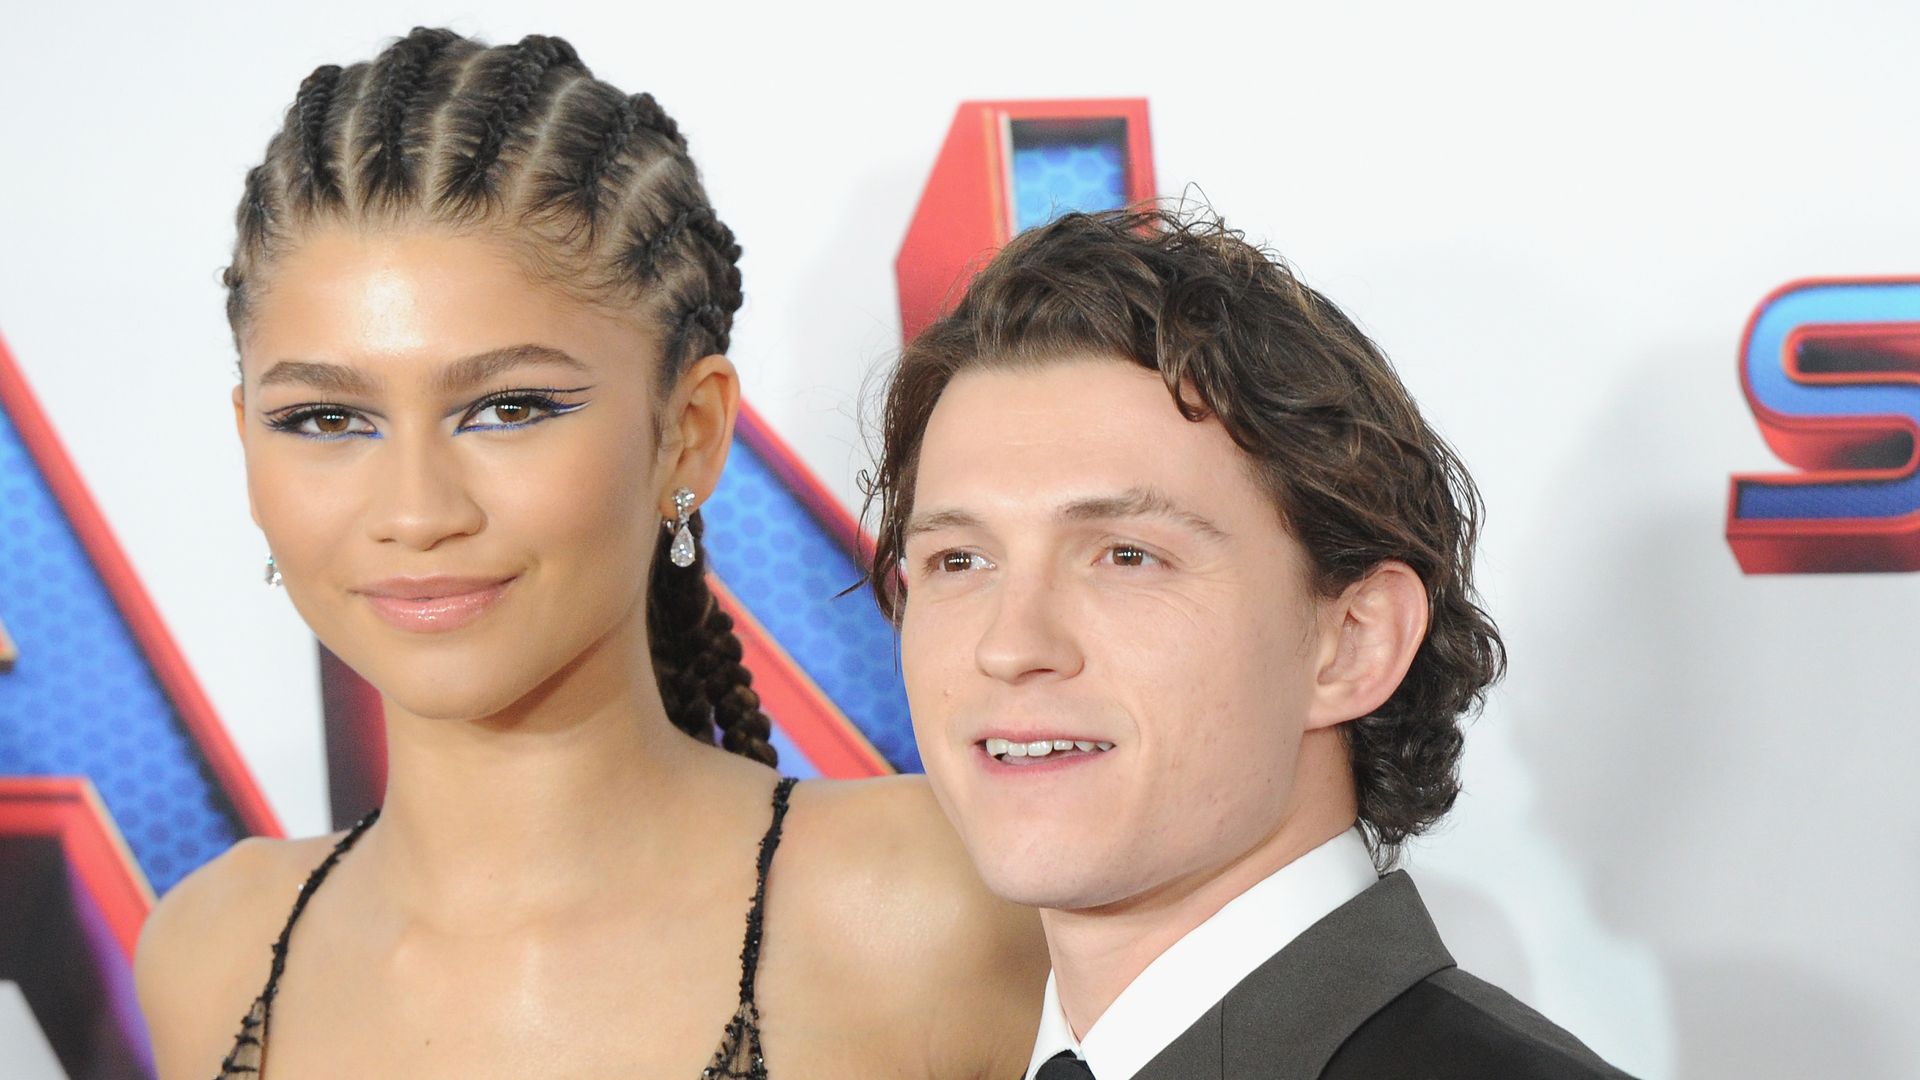 Zendaya and Tom Holland at a movie premiere